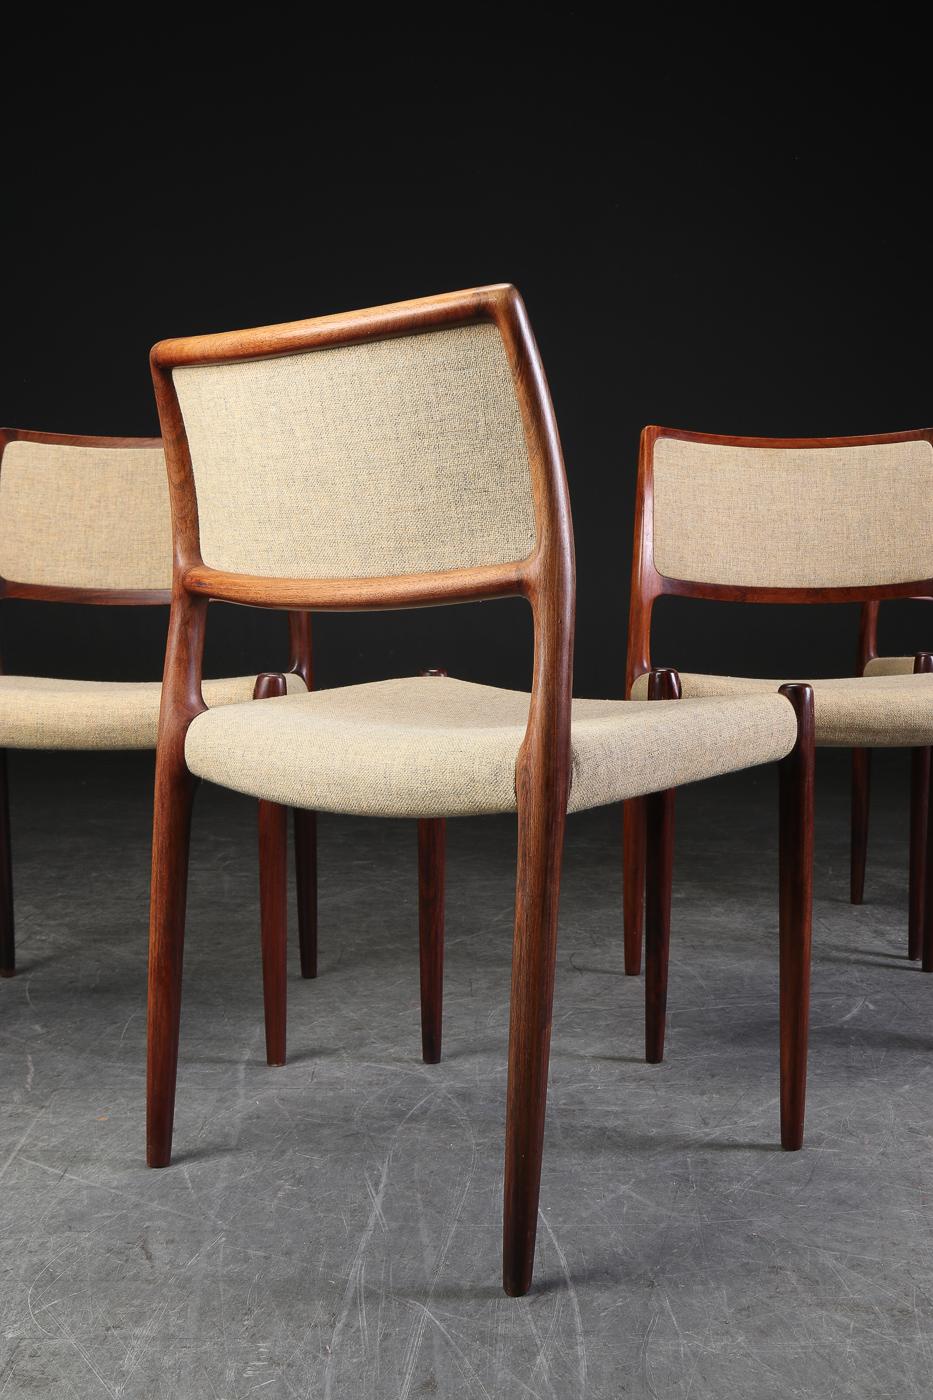 4 Dining chairs model 80 by Niels Otto Møller for J.L. Møller-Højbjerg, Denmark. Rosewood chairs with fabric wool upholstery Model 80, 1970s Marked under the seat